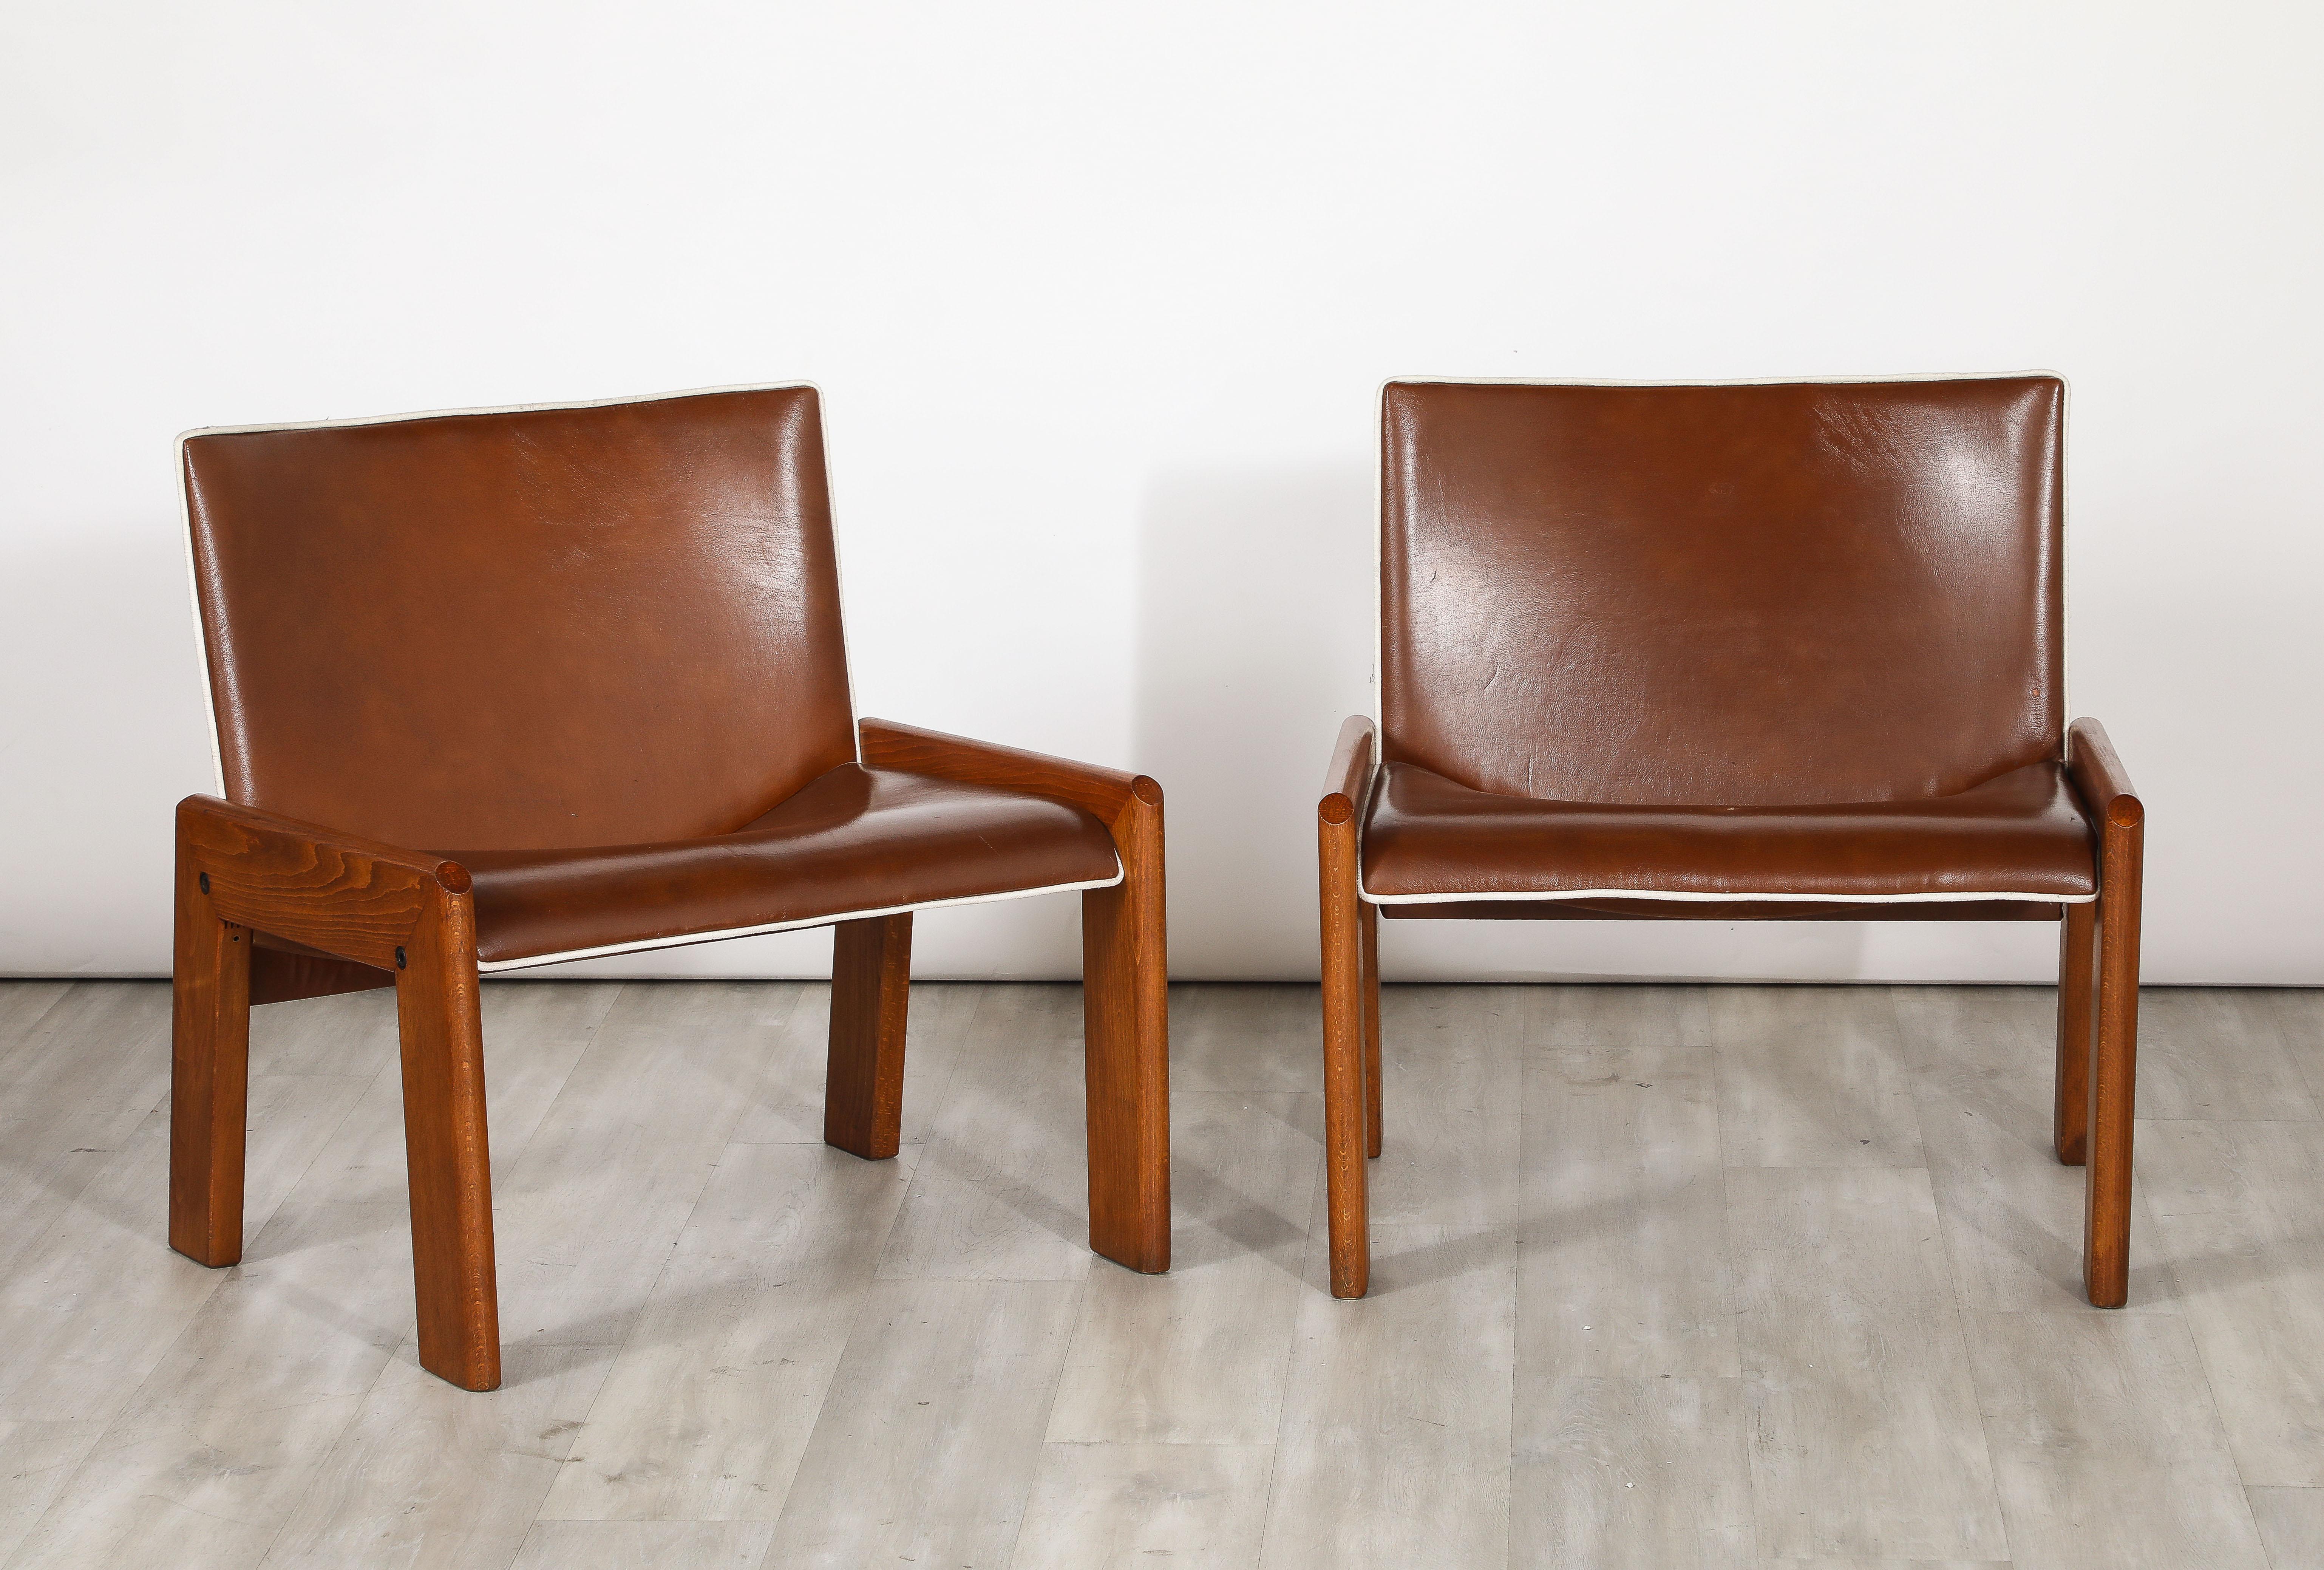 Pair of Leather Side Chairs by B&T Salotti, Italy, circa 1970 For Sale 8